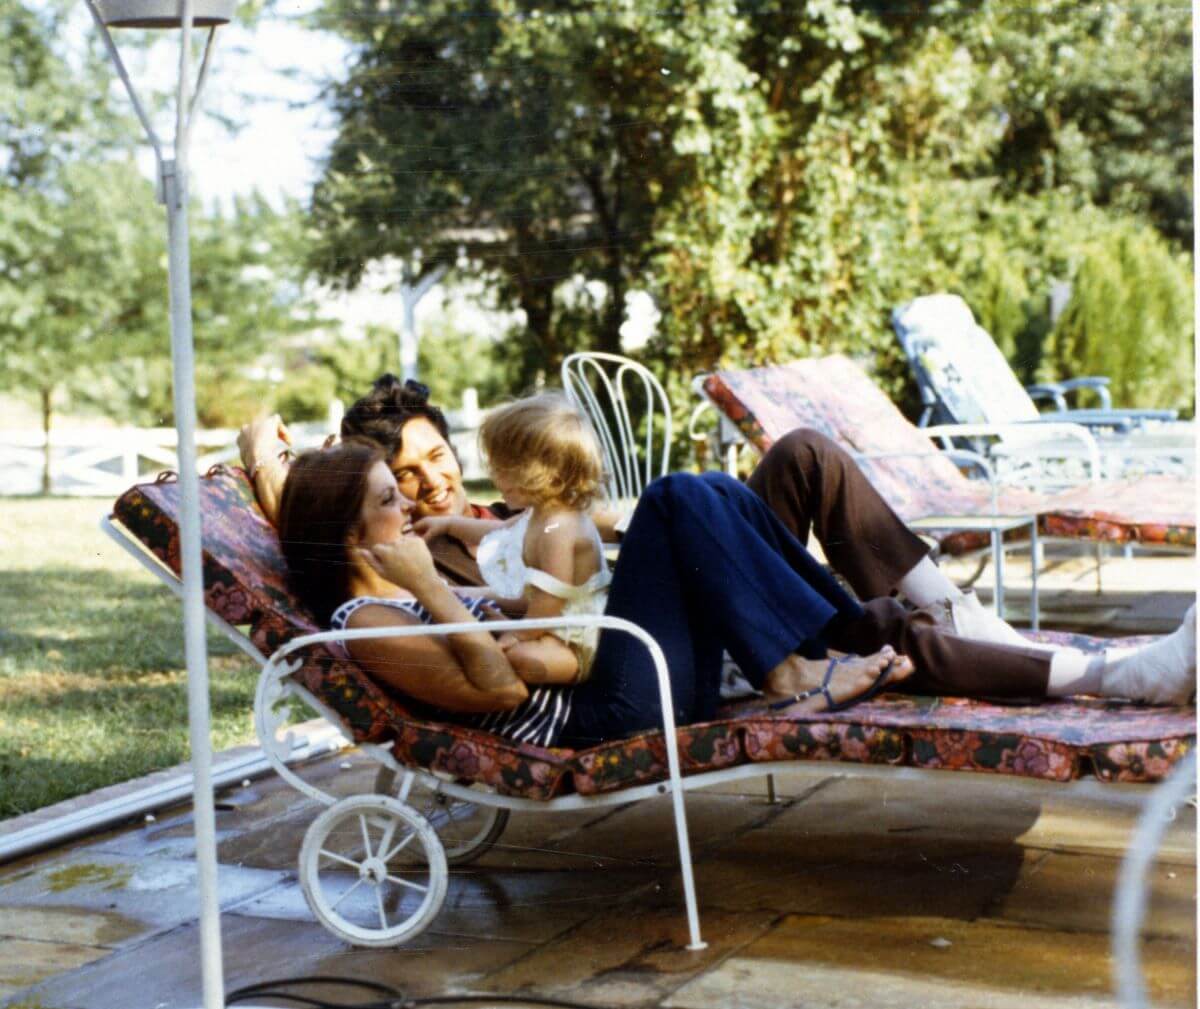 Elvis and Priscilla Presley lay in lawn chairs. Lisa Marie Presley sits on Priscilla's stomach.